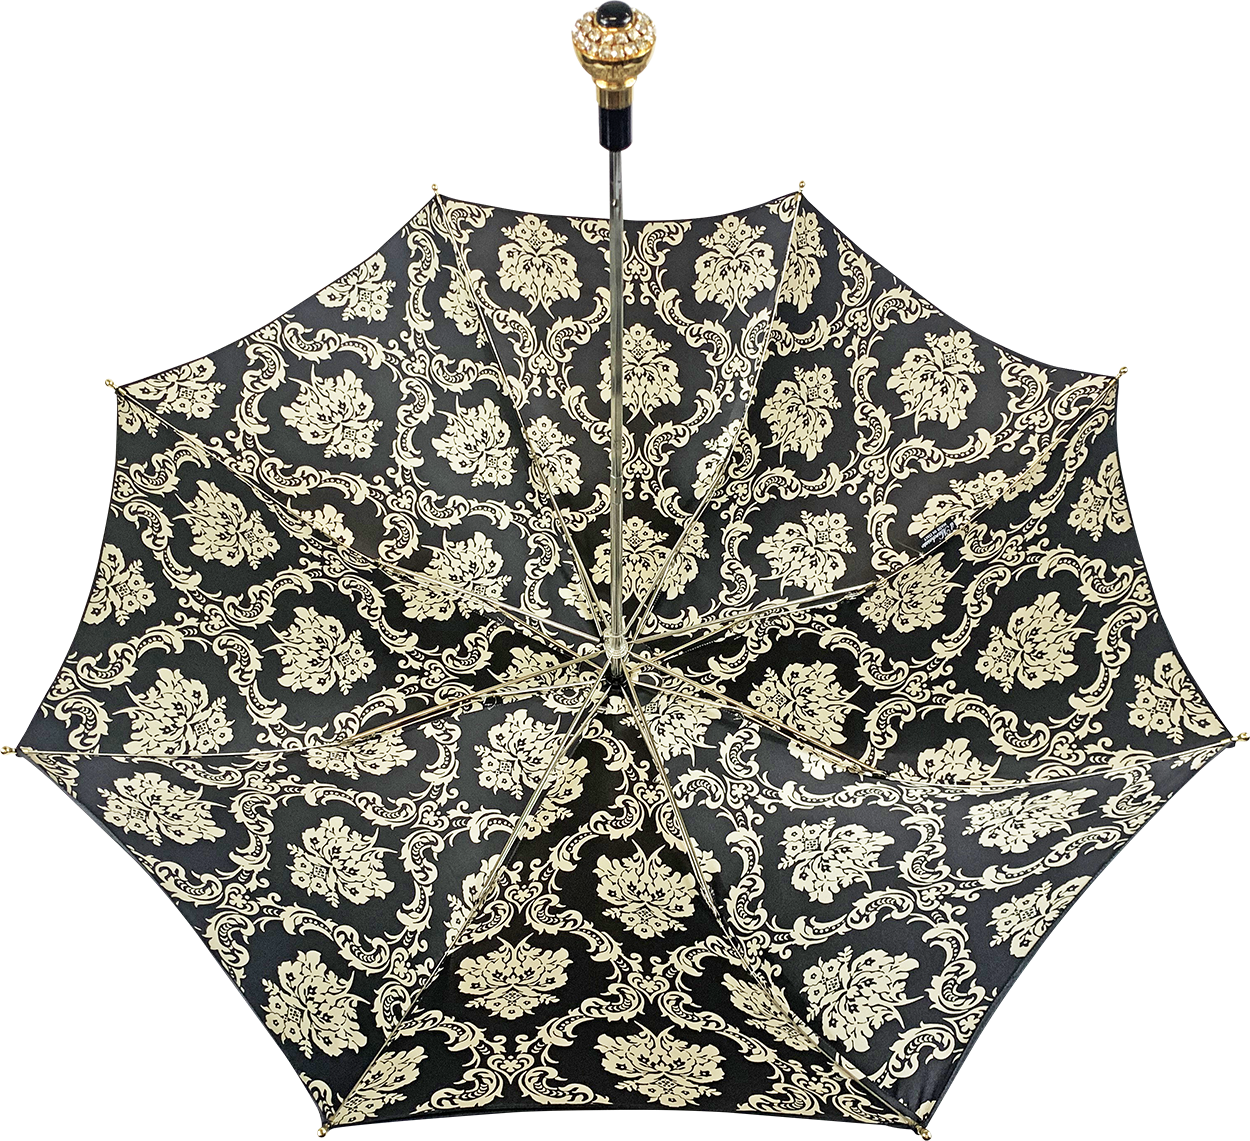 Black double canopy umbrella with damask design